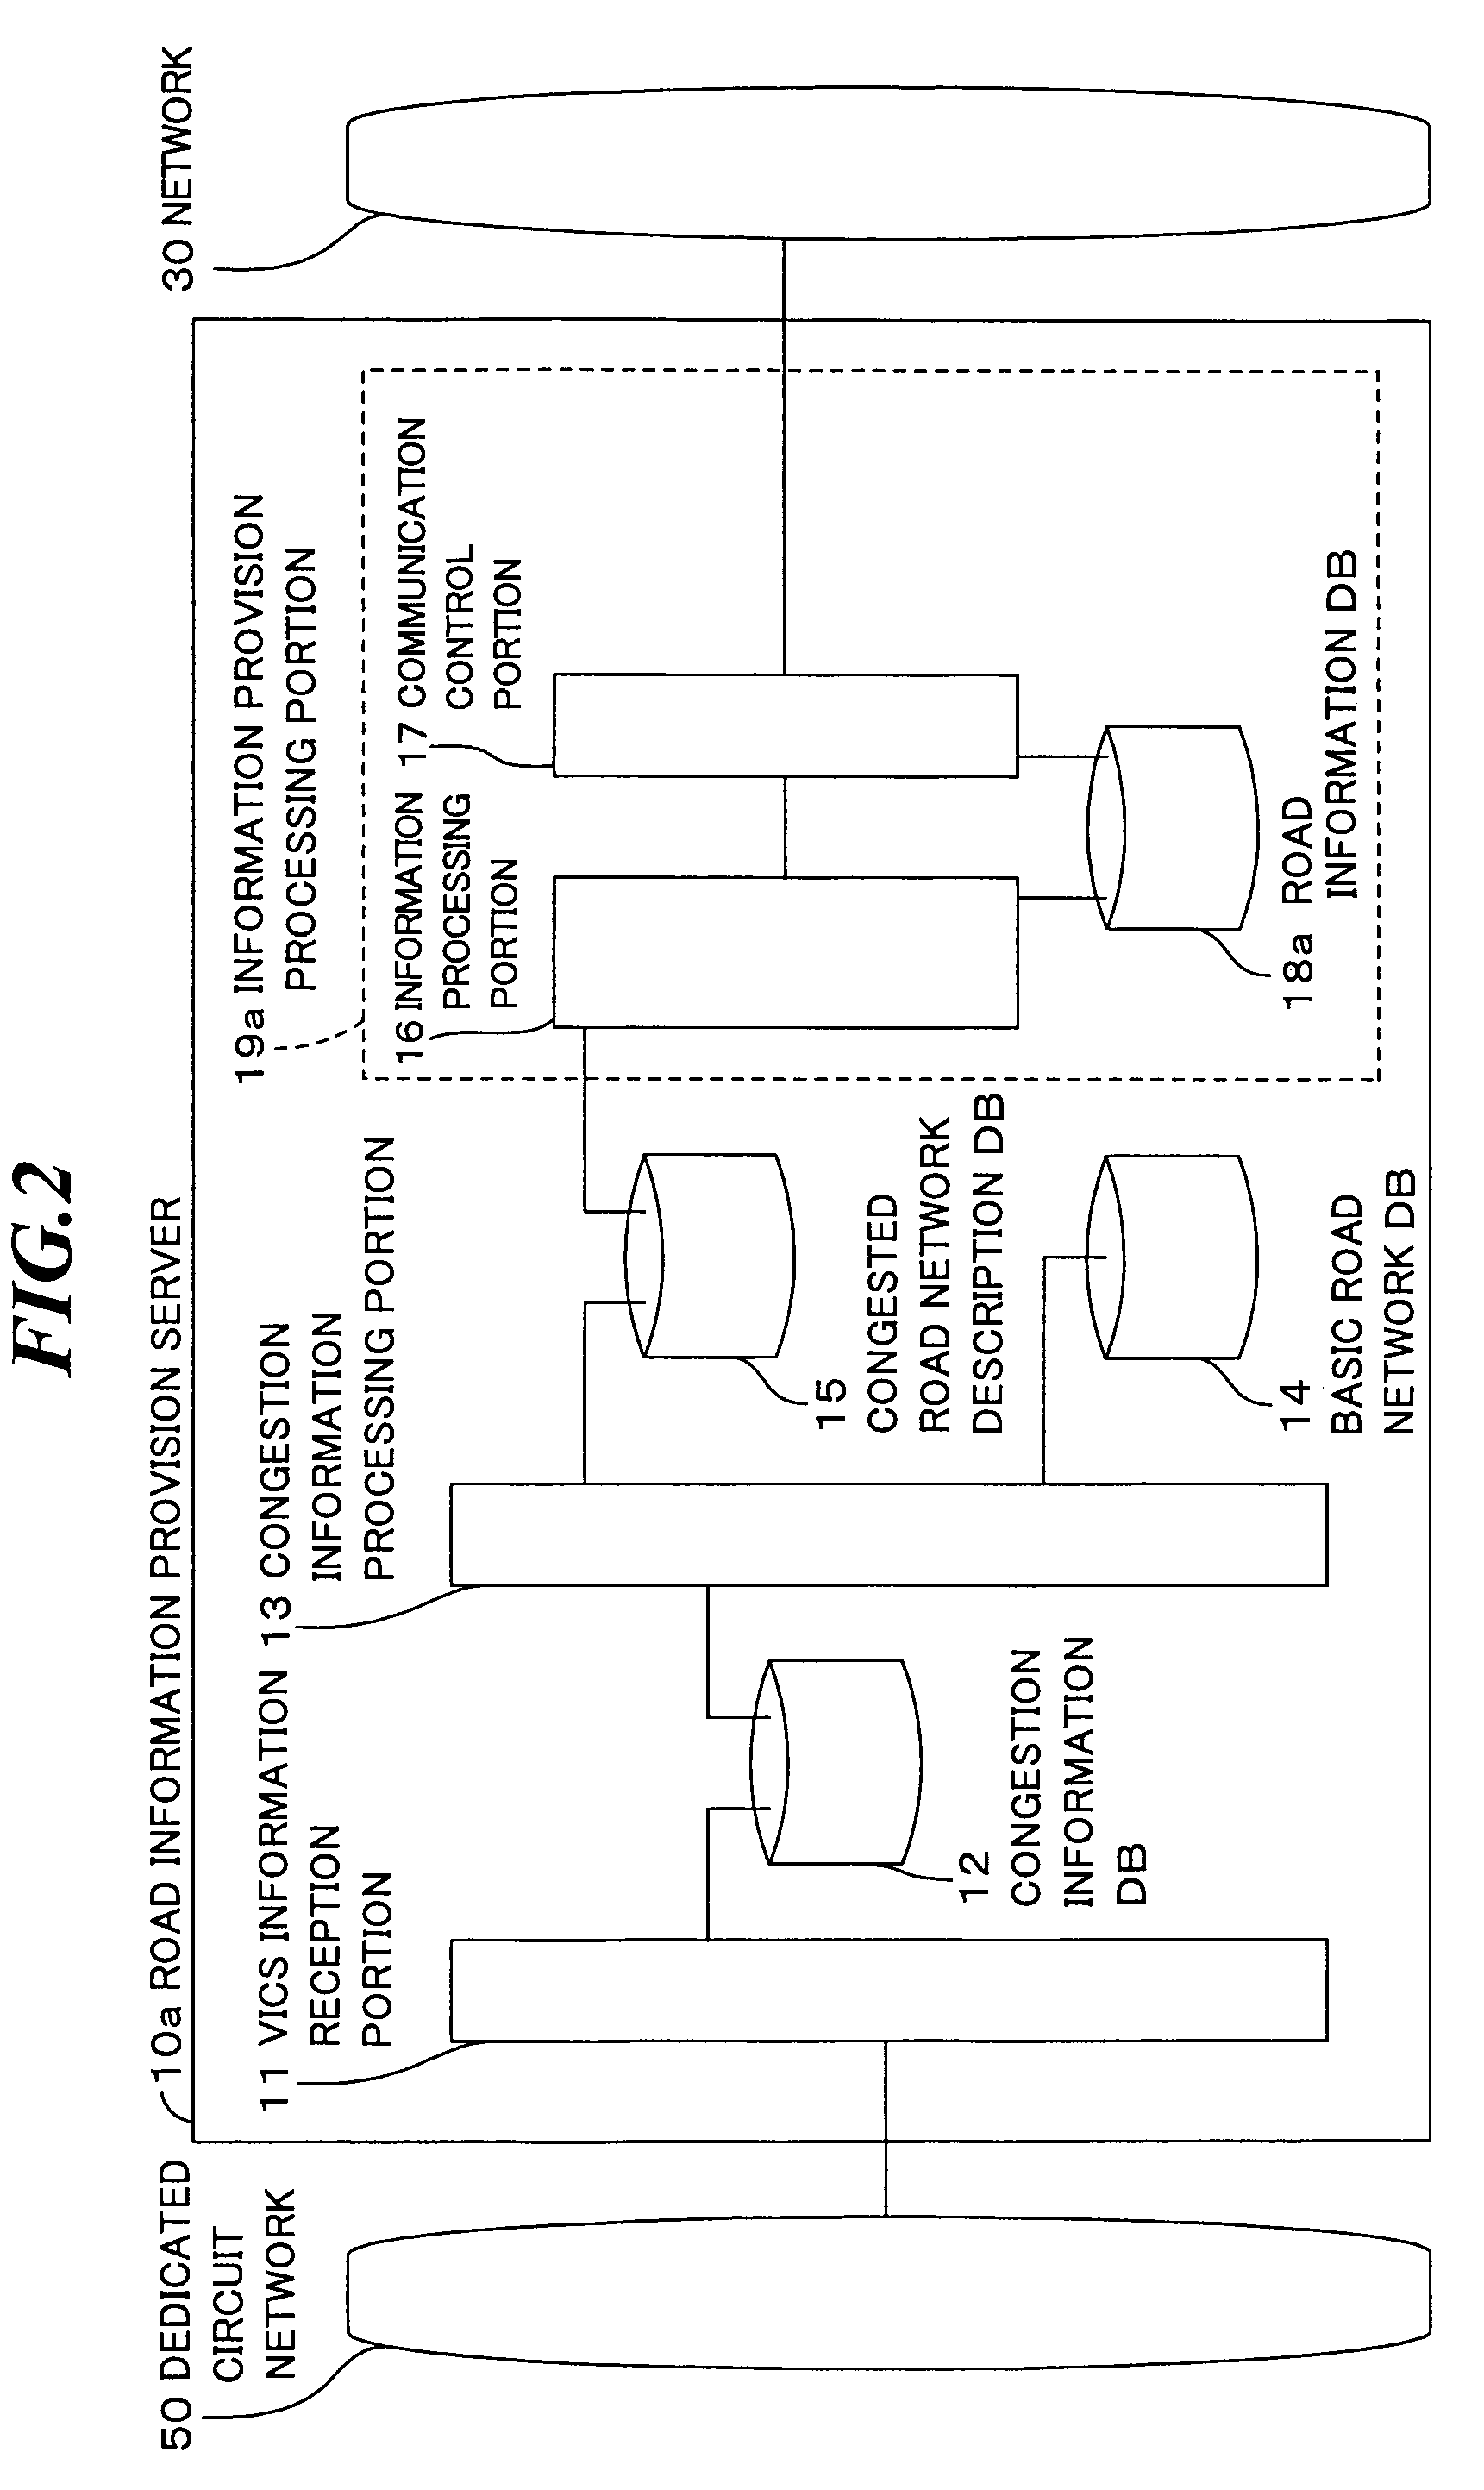 Road information provision server, road information provision system, road information provision method, route search server, route search system, and route search method